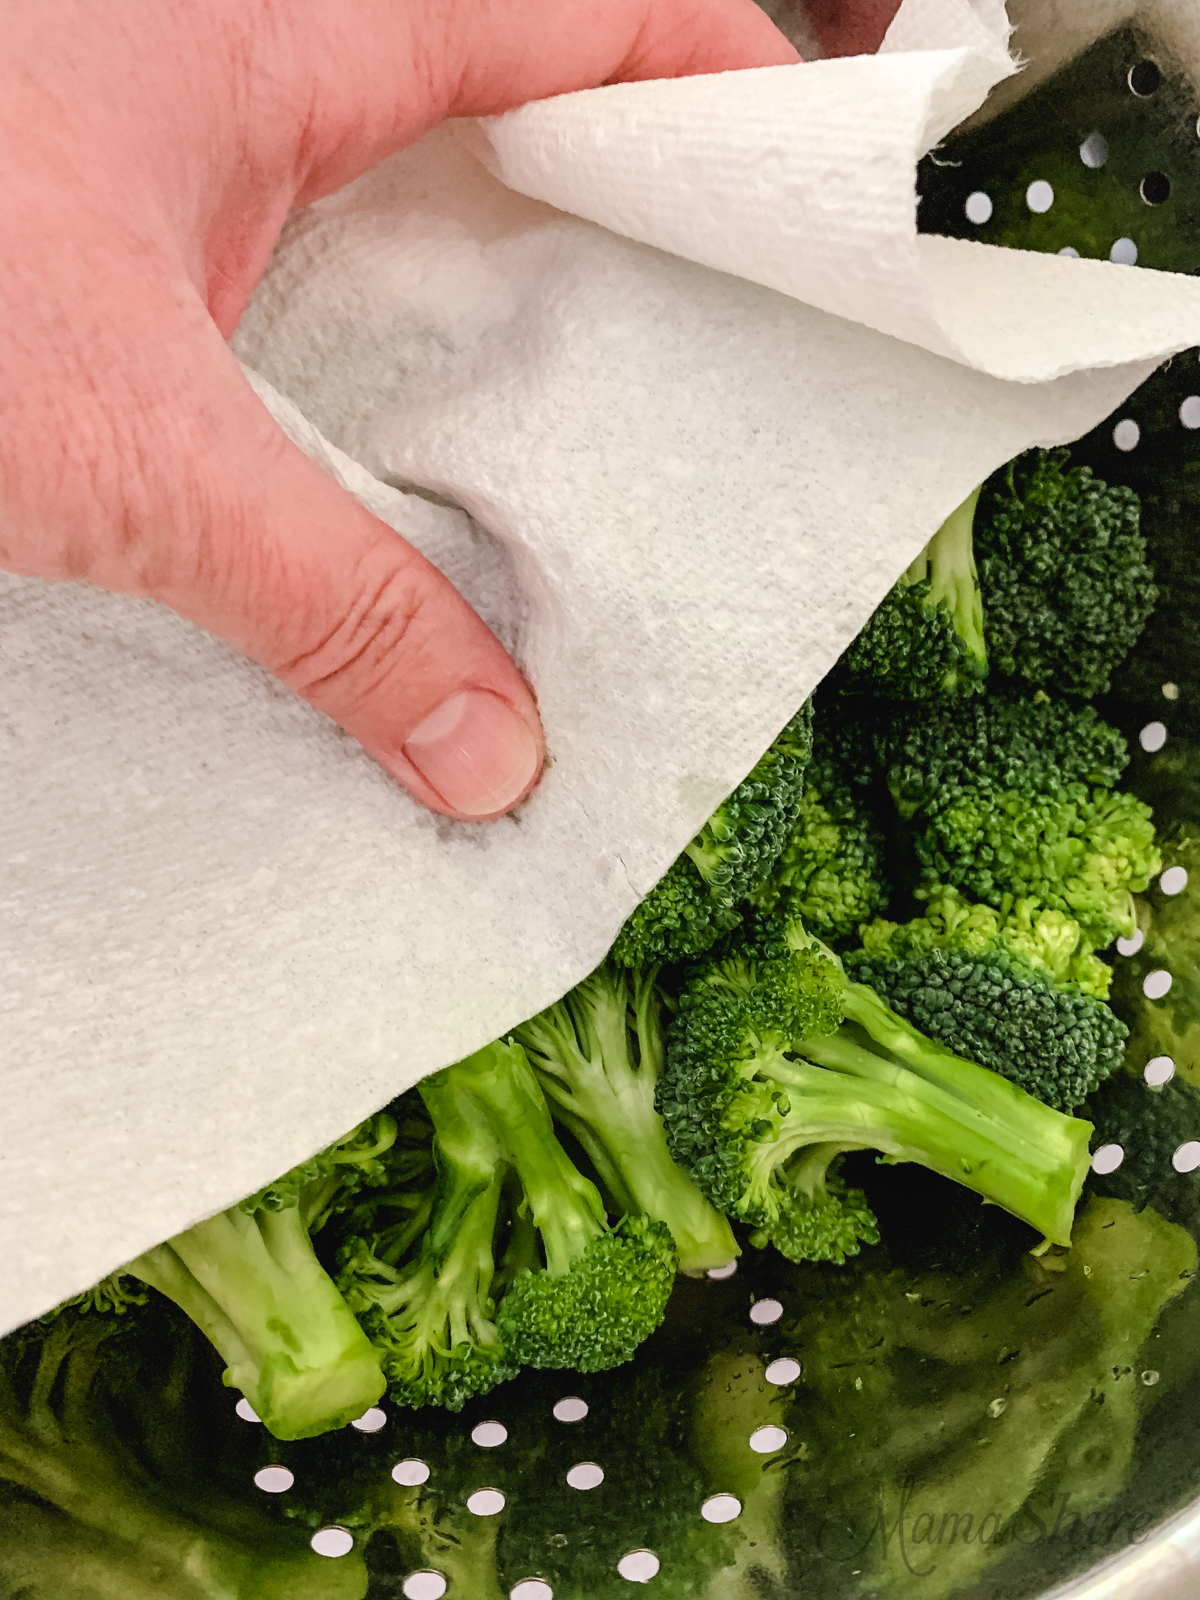 Drying broccoli before air frying.